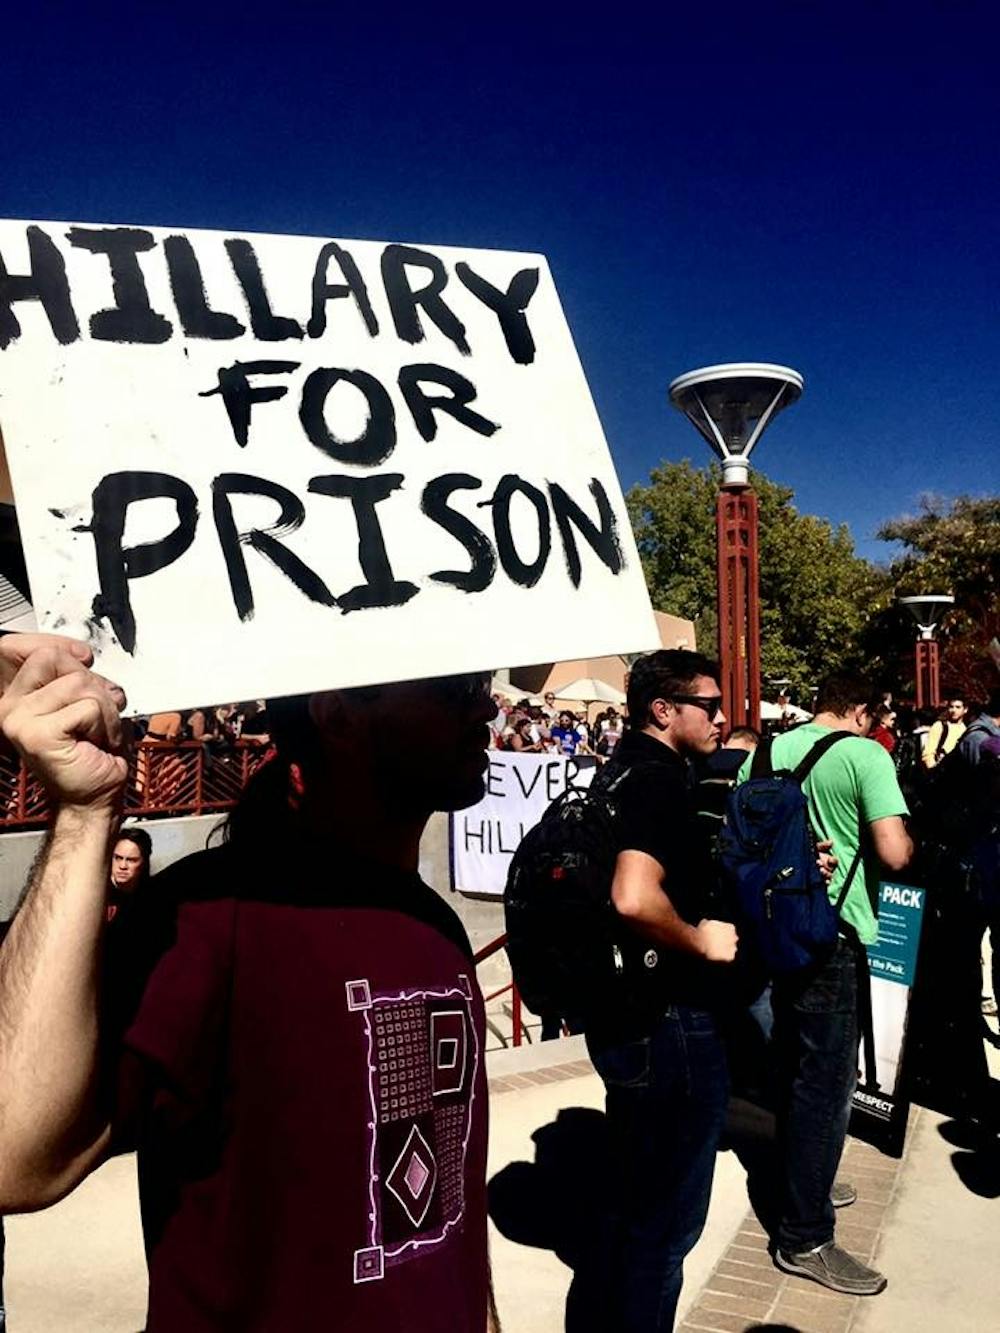 A rally attendee waves an anti-Hillary Clinton sign at the rally in which Bernie Sanders campaigned for the Democratic presidential nominee at UNM on Tuesday, Oct. 18, 2016. Other anti-Clinton proponents and third-party supporters watched and made outspoken comments of their own outside the SUB.&nbsp;